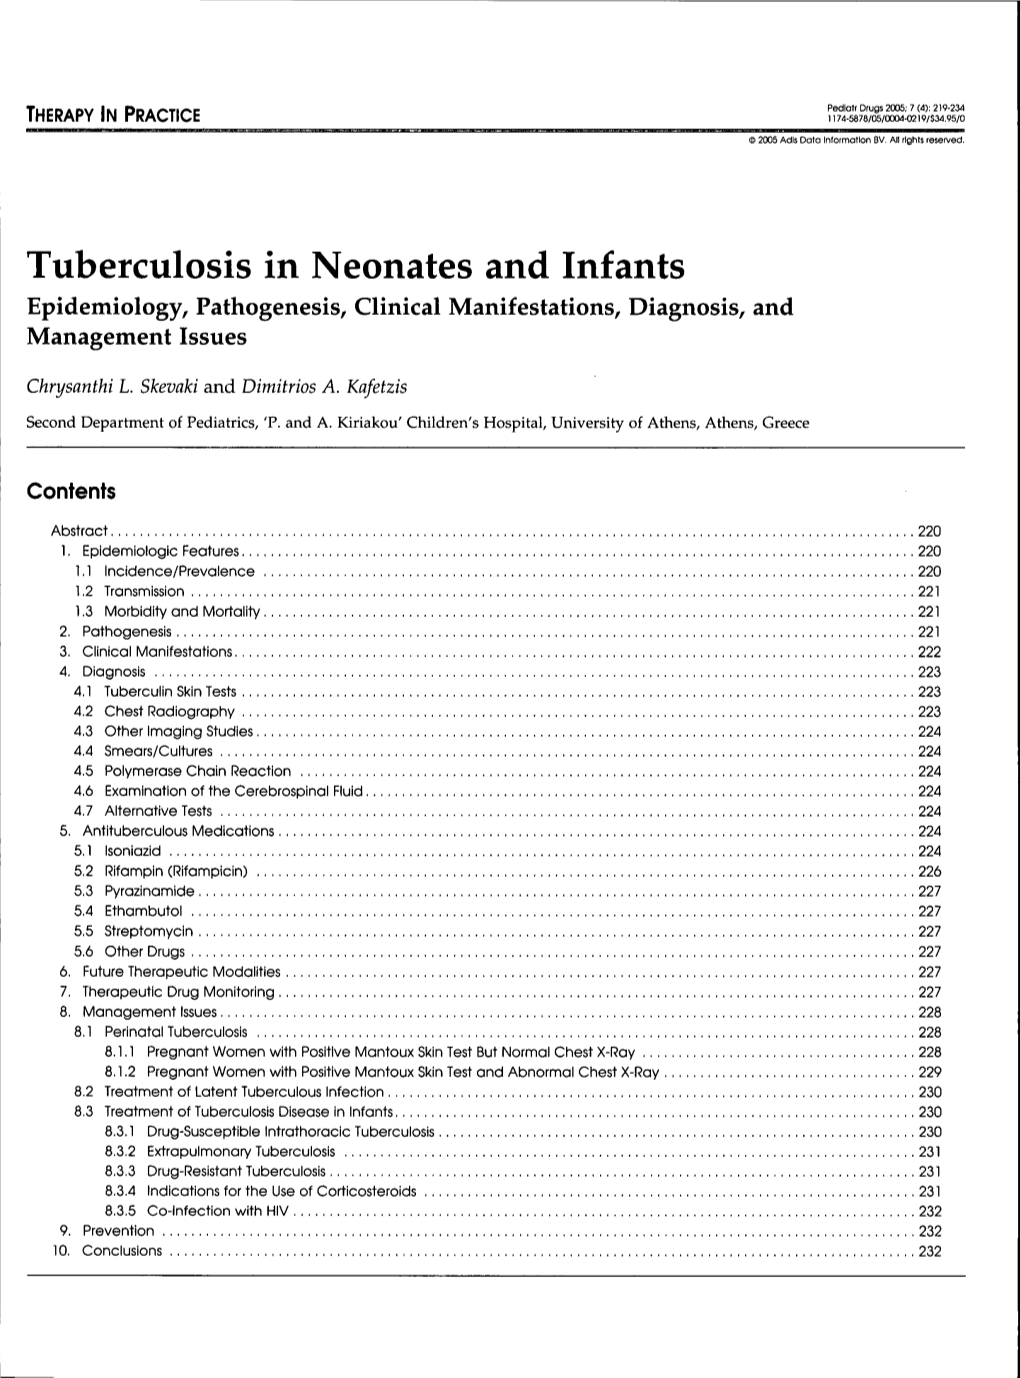 Tuberculosis in Neonates and Infants Epidemiology, Pathogenesis, Clinical Manifestations, Diagnosis, and Management Issues